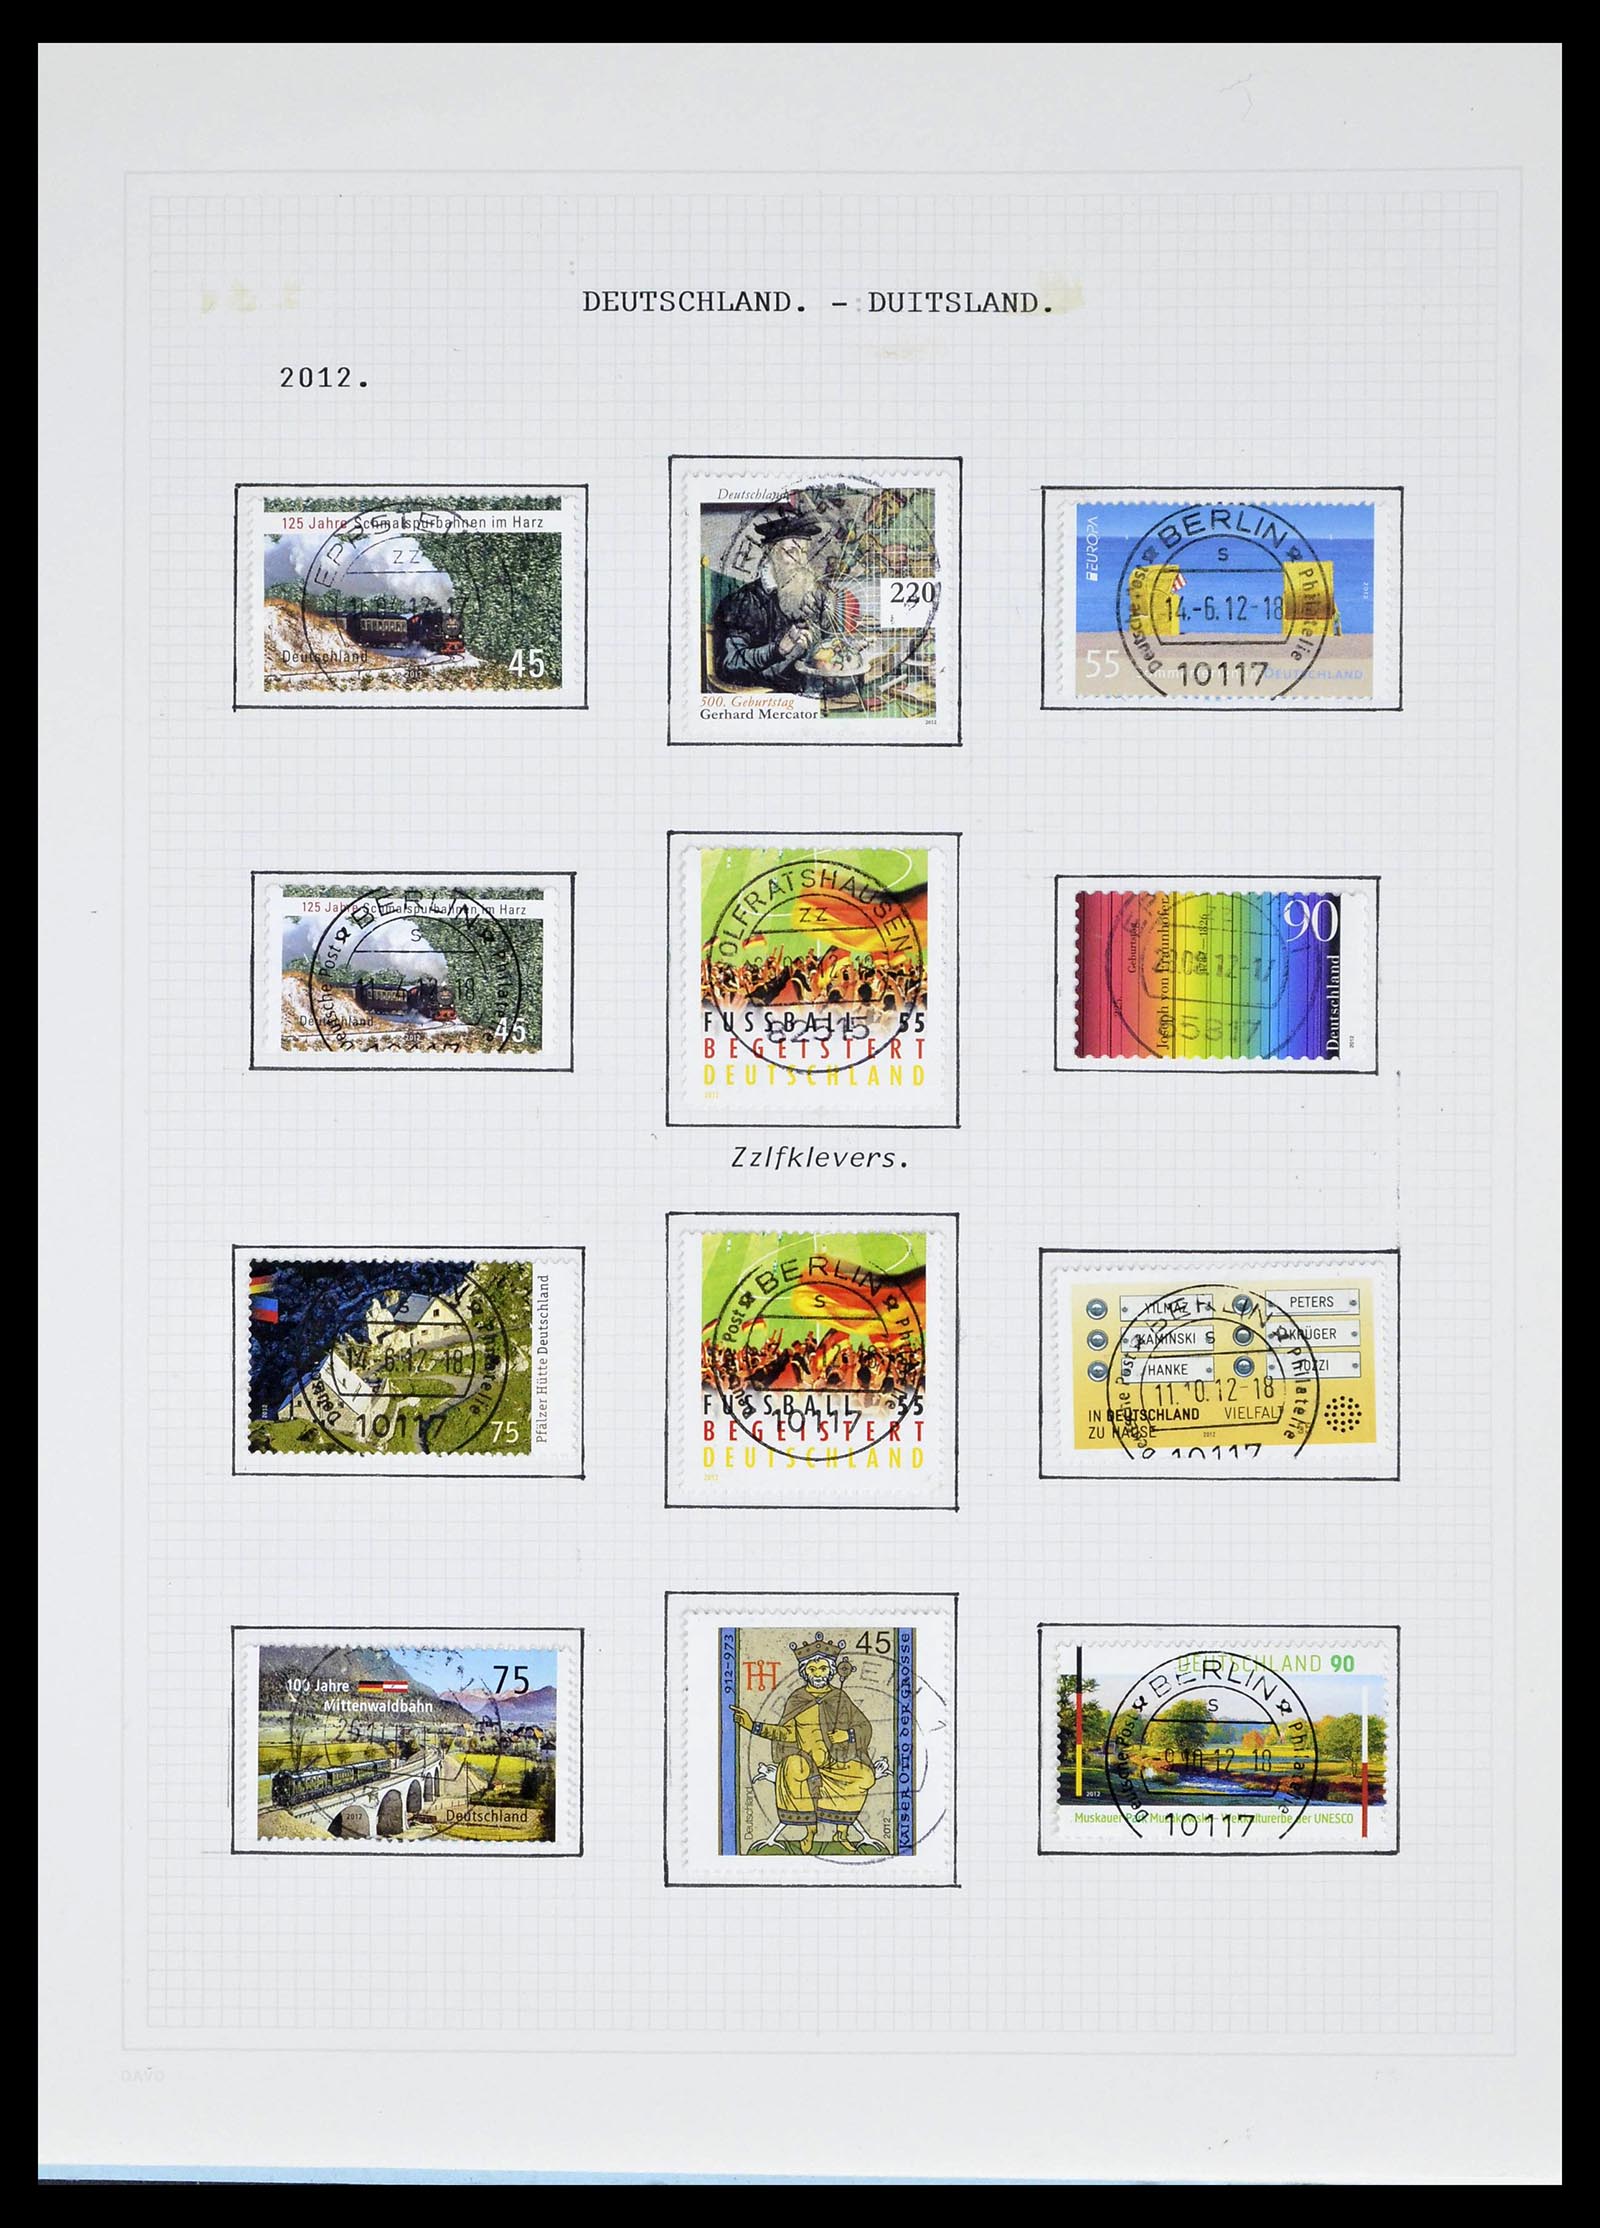 39324 0209 - Stamp collection 39324 Bundespost 1986-2012.